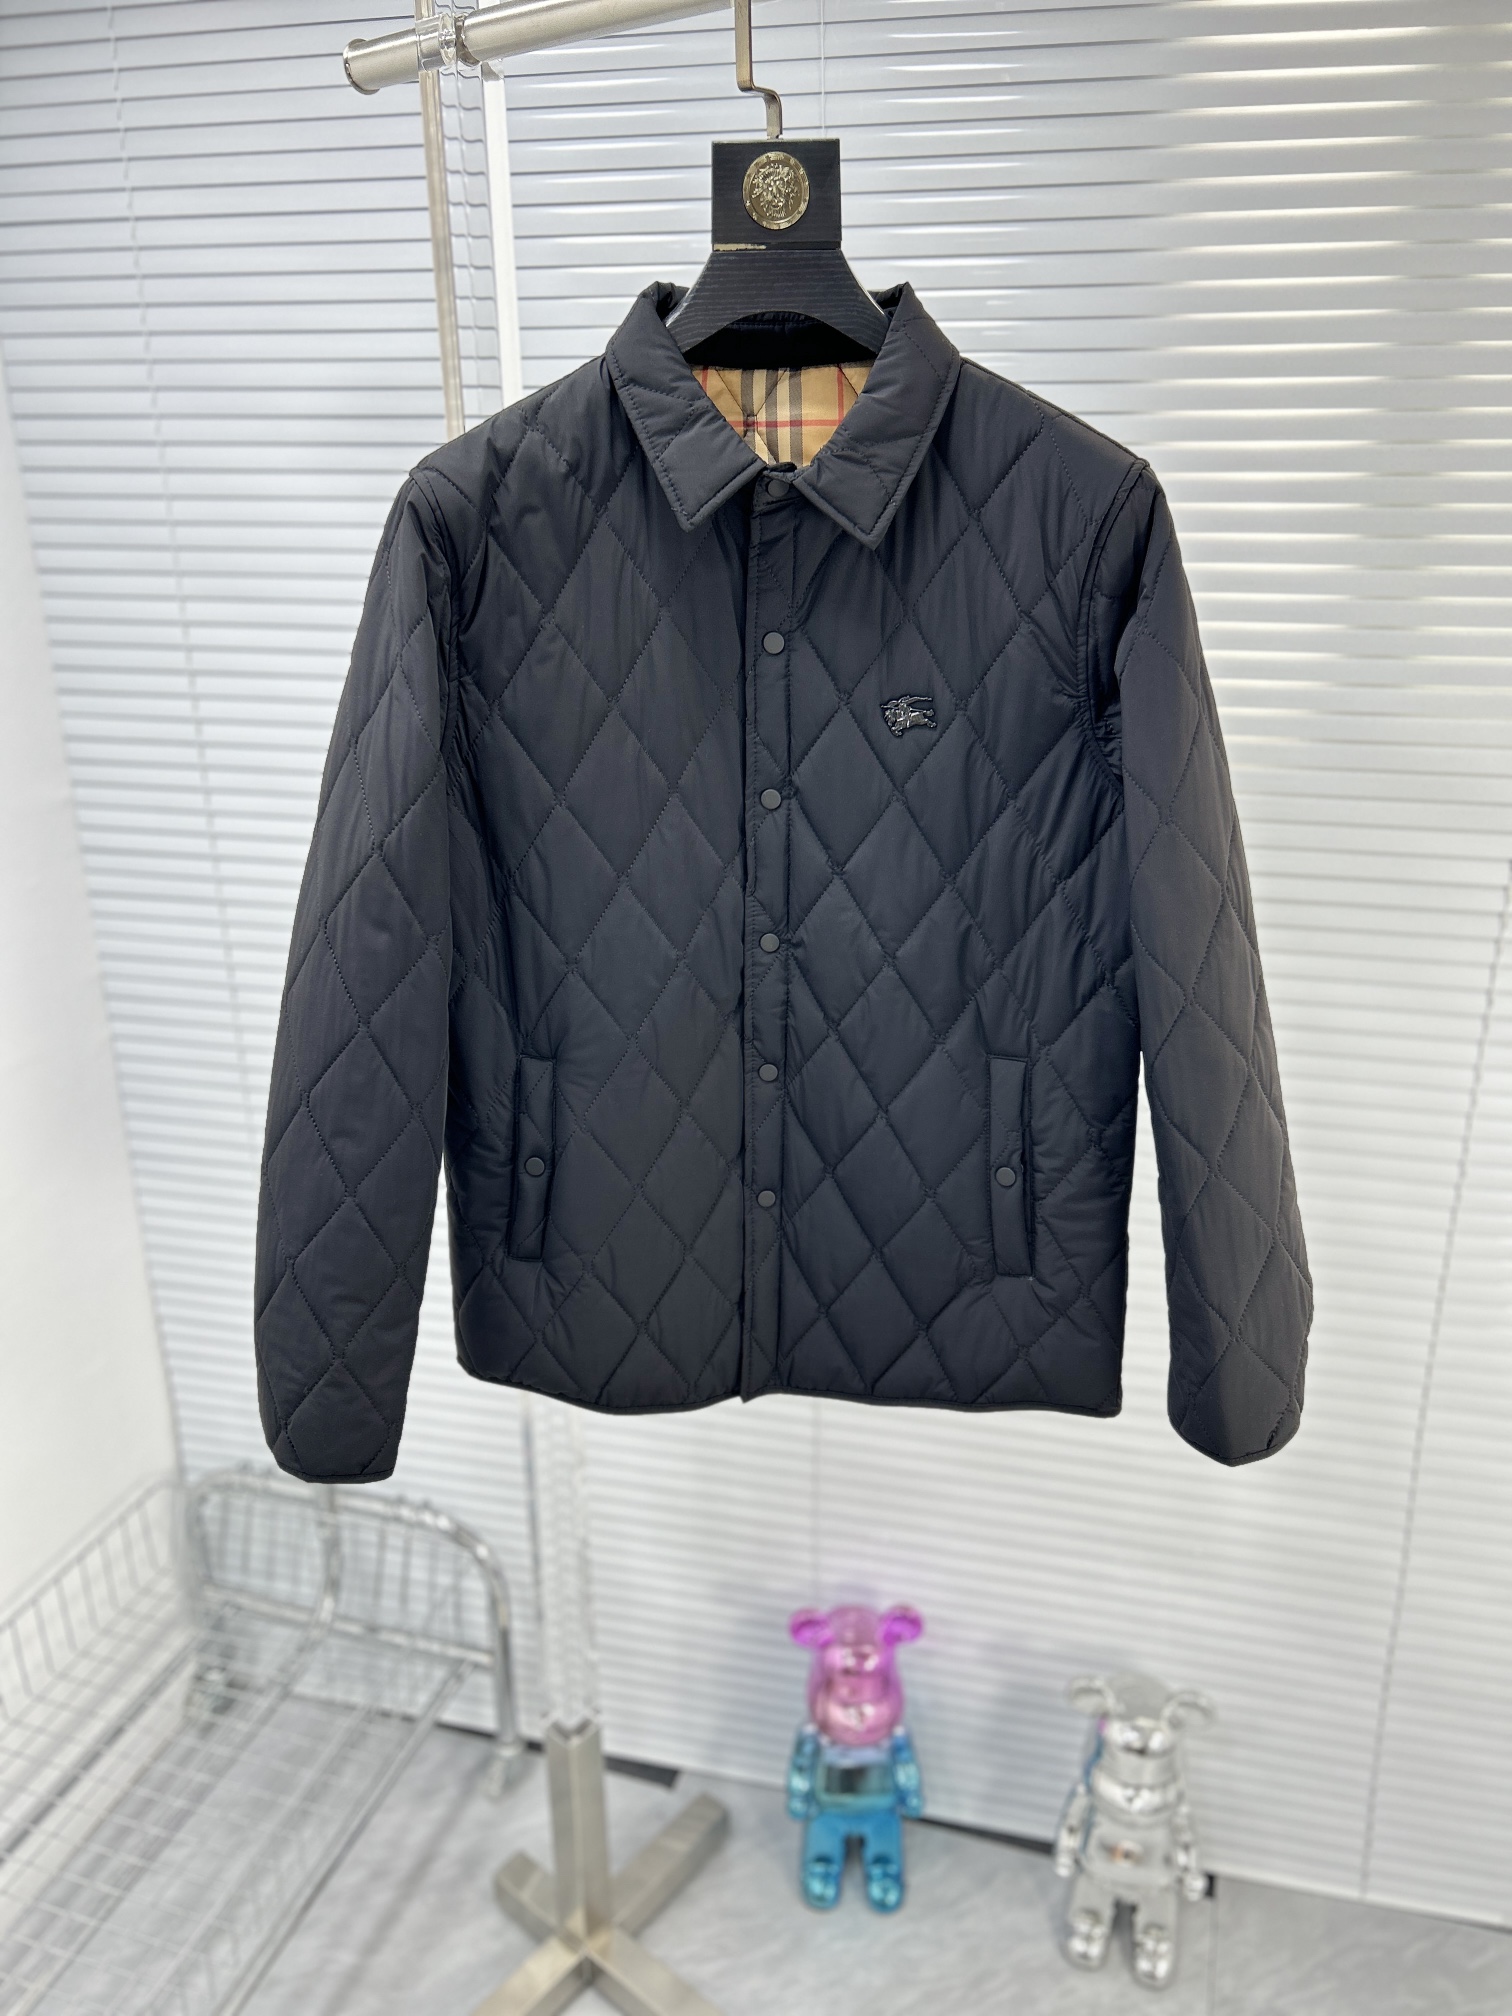 Burberry Clothing Coats & Jackets Cotton Fall/Winter Collection Fashion